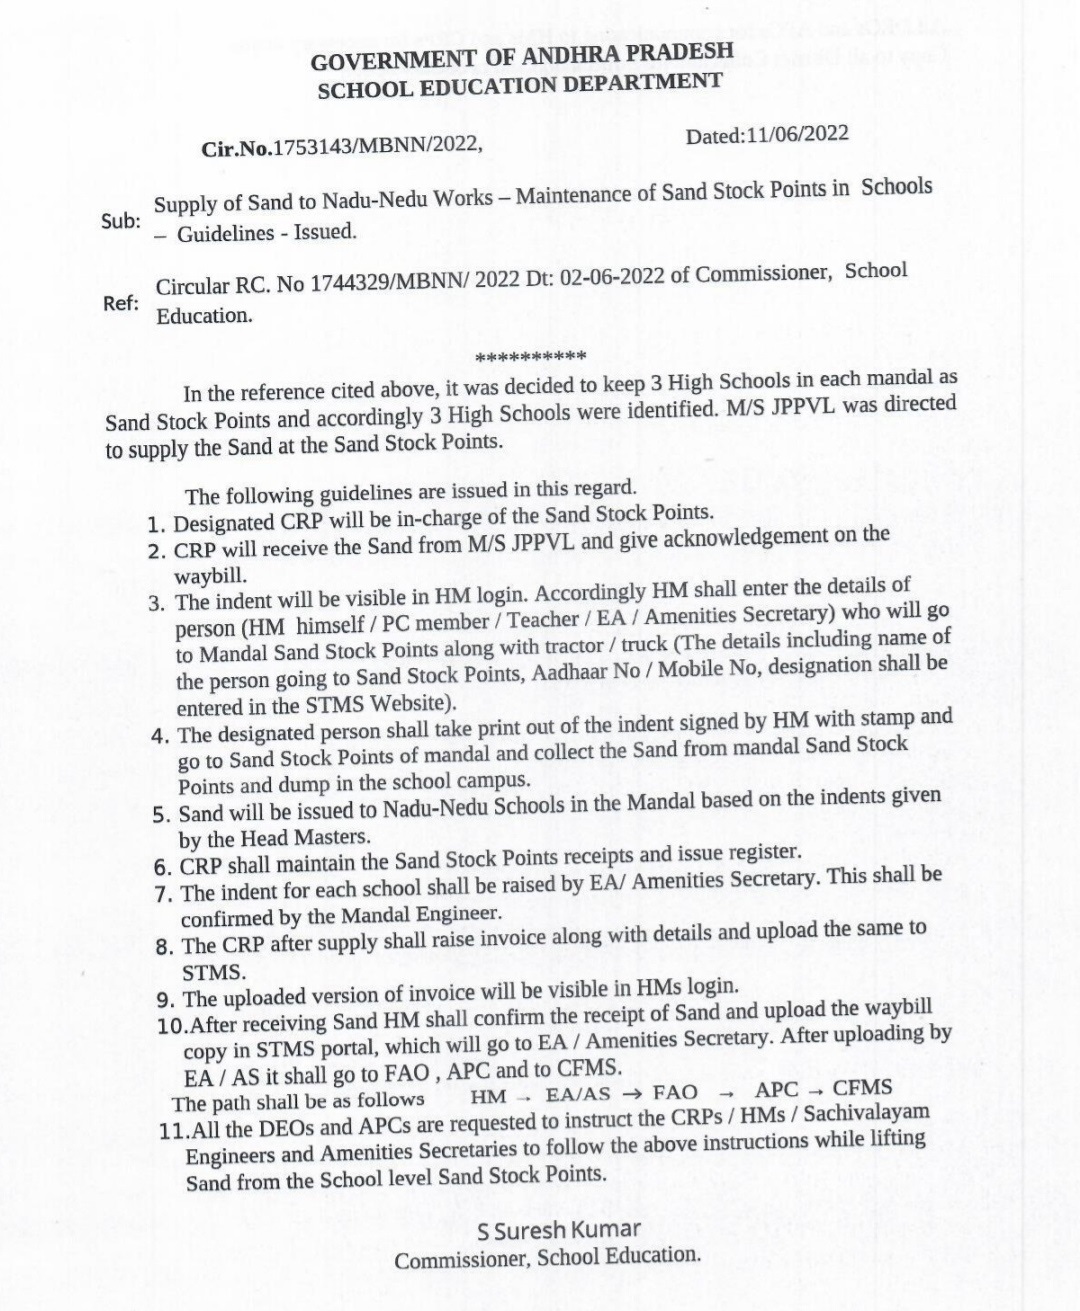 Supply of Sand to Nadu-Nedu Works - Maintenance of Sand Stock Points in Schools Guidelines